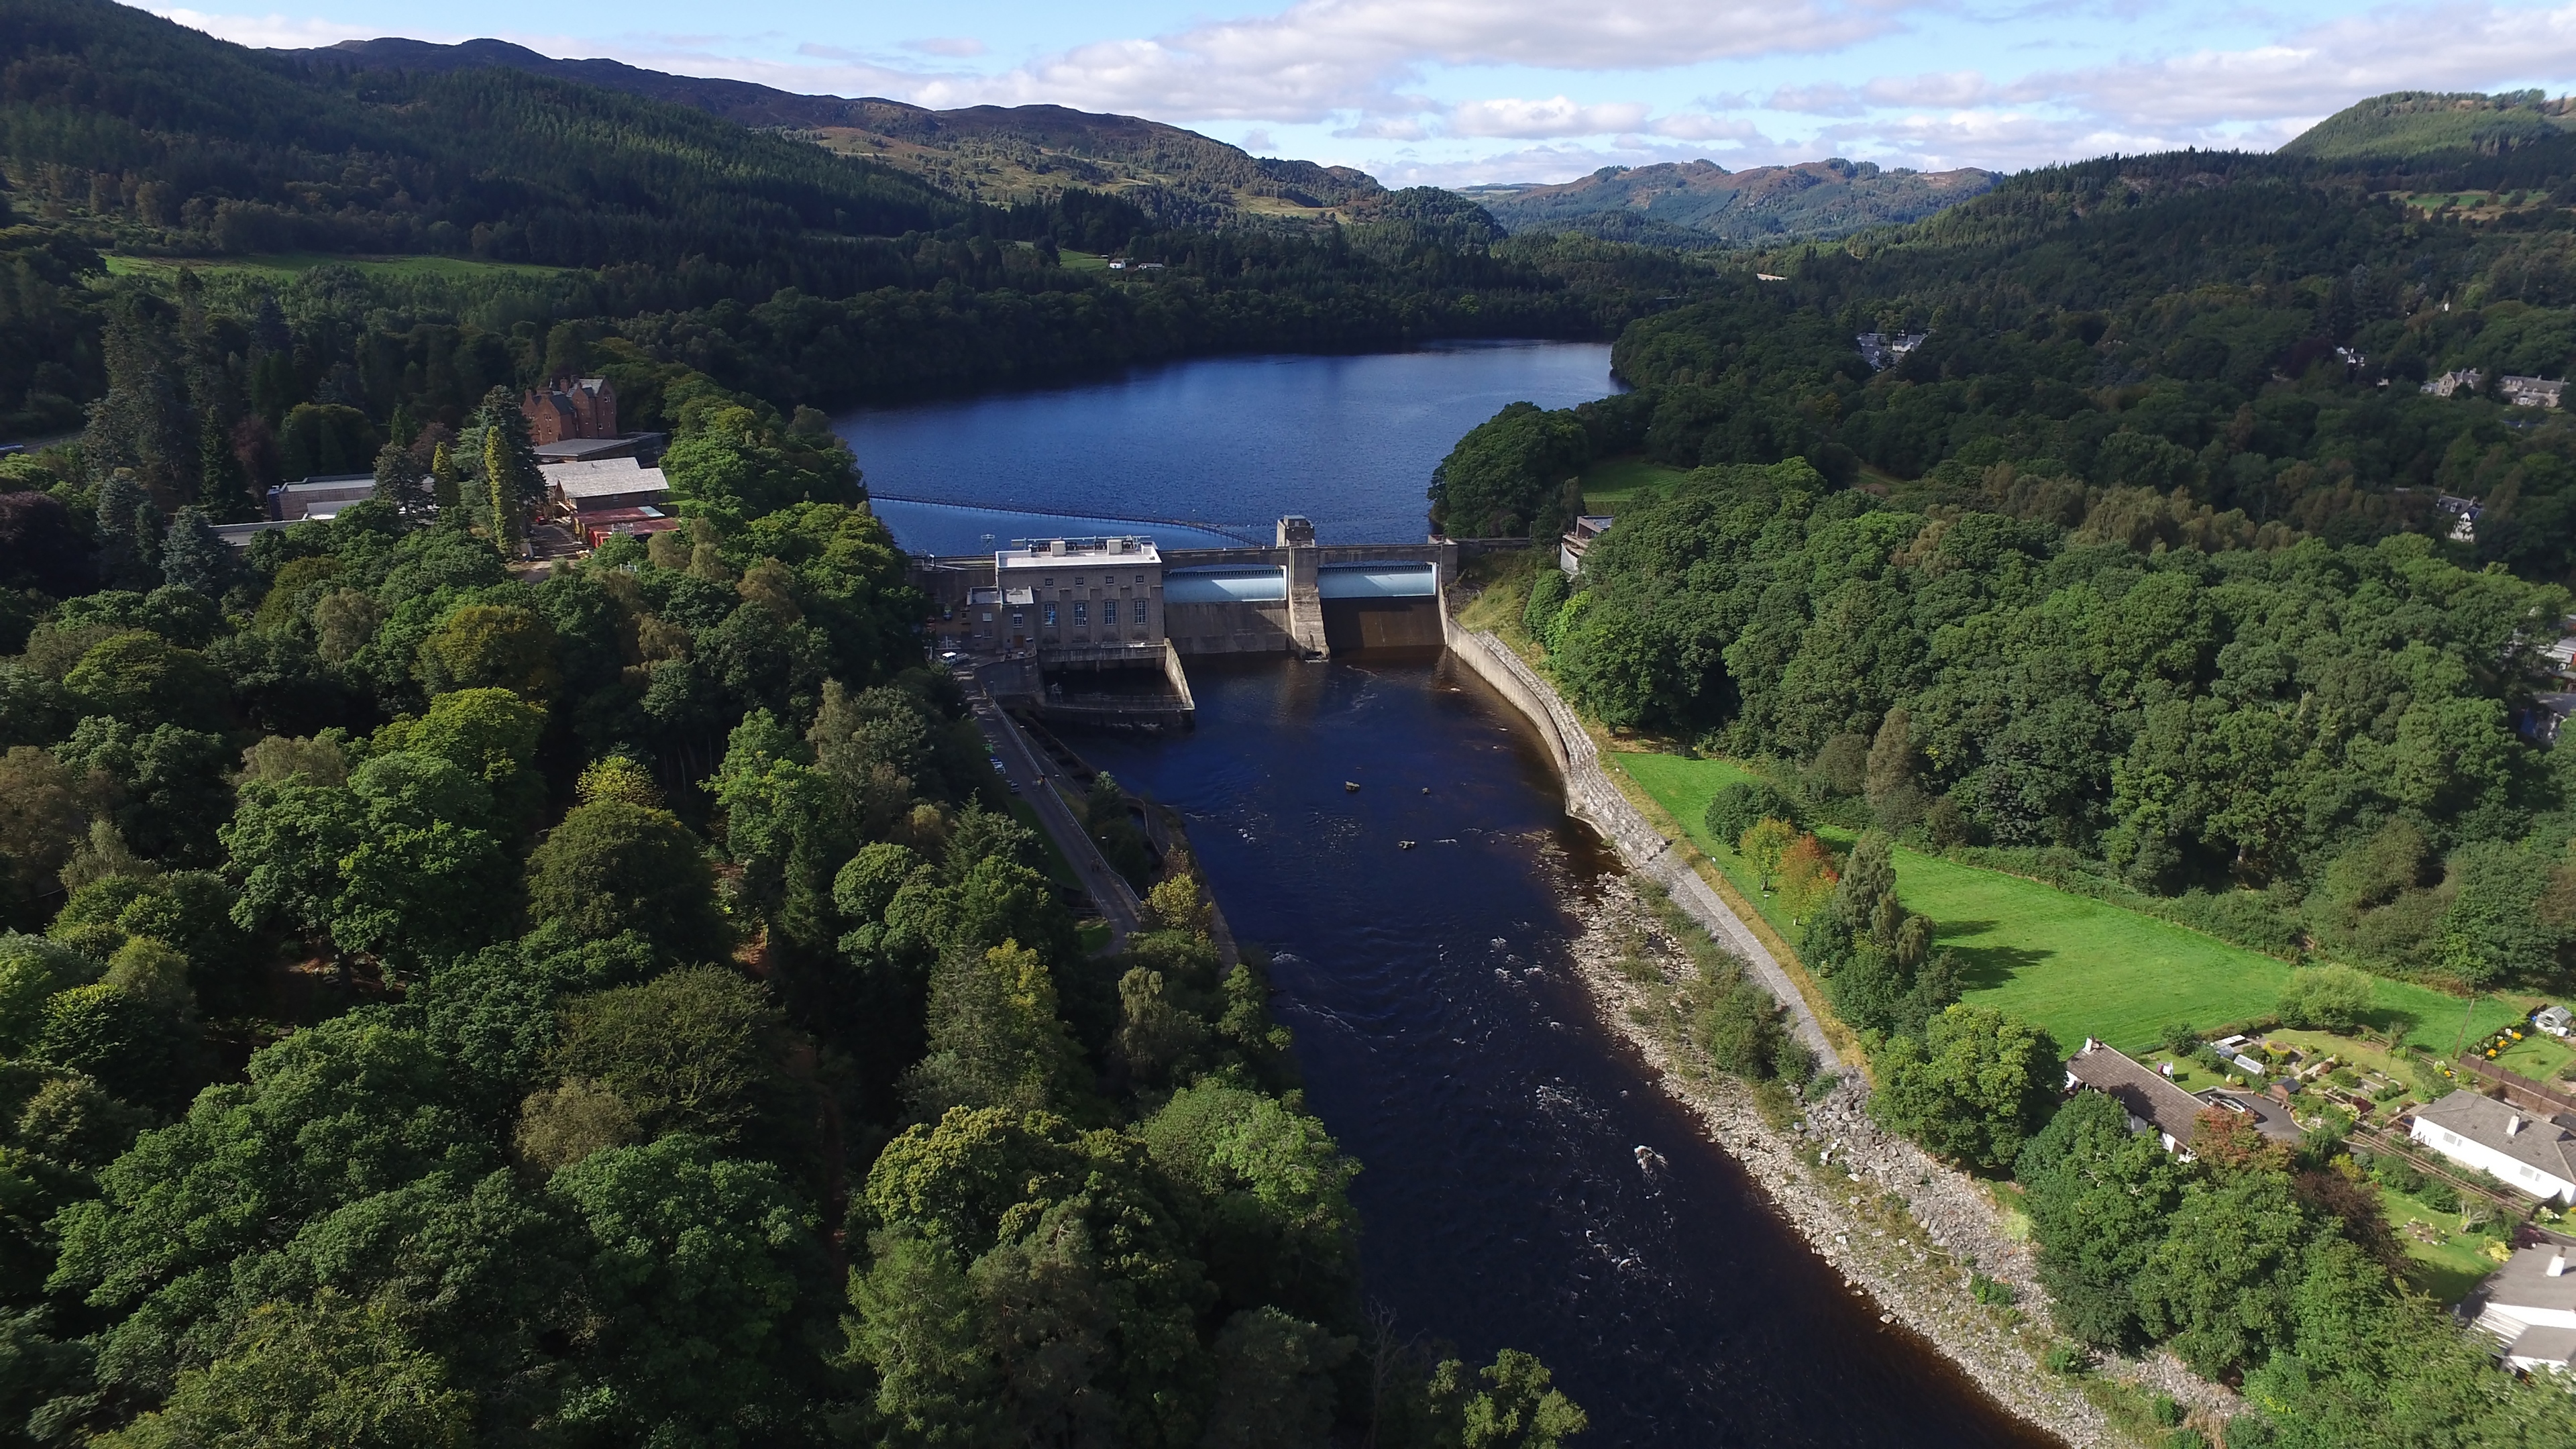 Pitlochry dam and visitor centre.